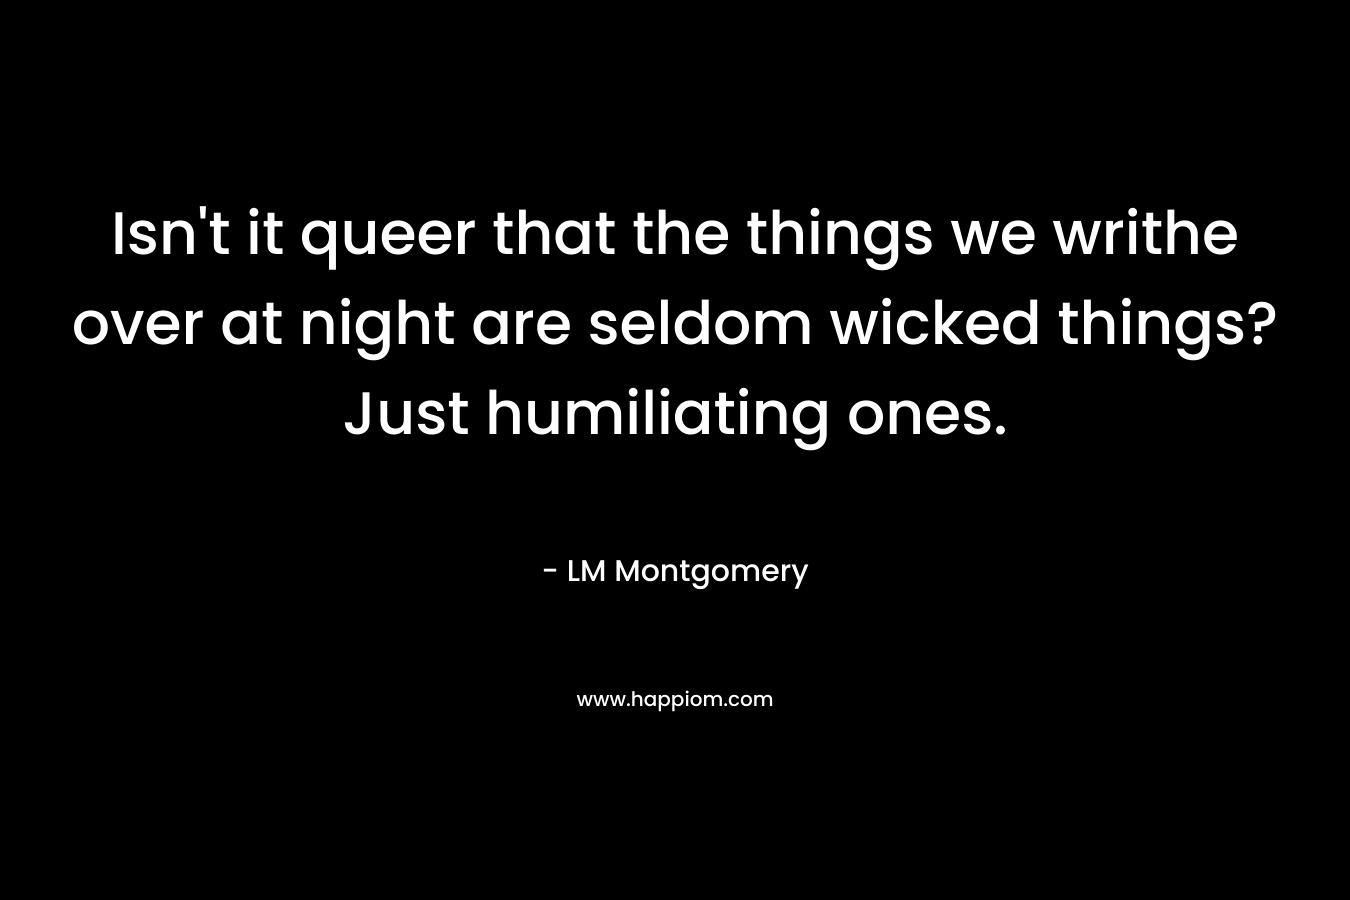 Isn’t it queer that the things we writhe over at night are seldom wicked things? Just humiliating ones. – LM Montgomery